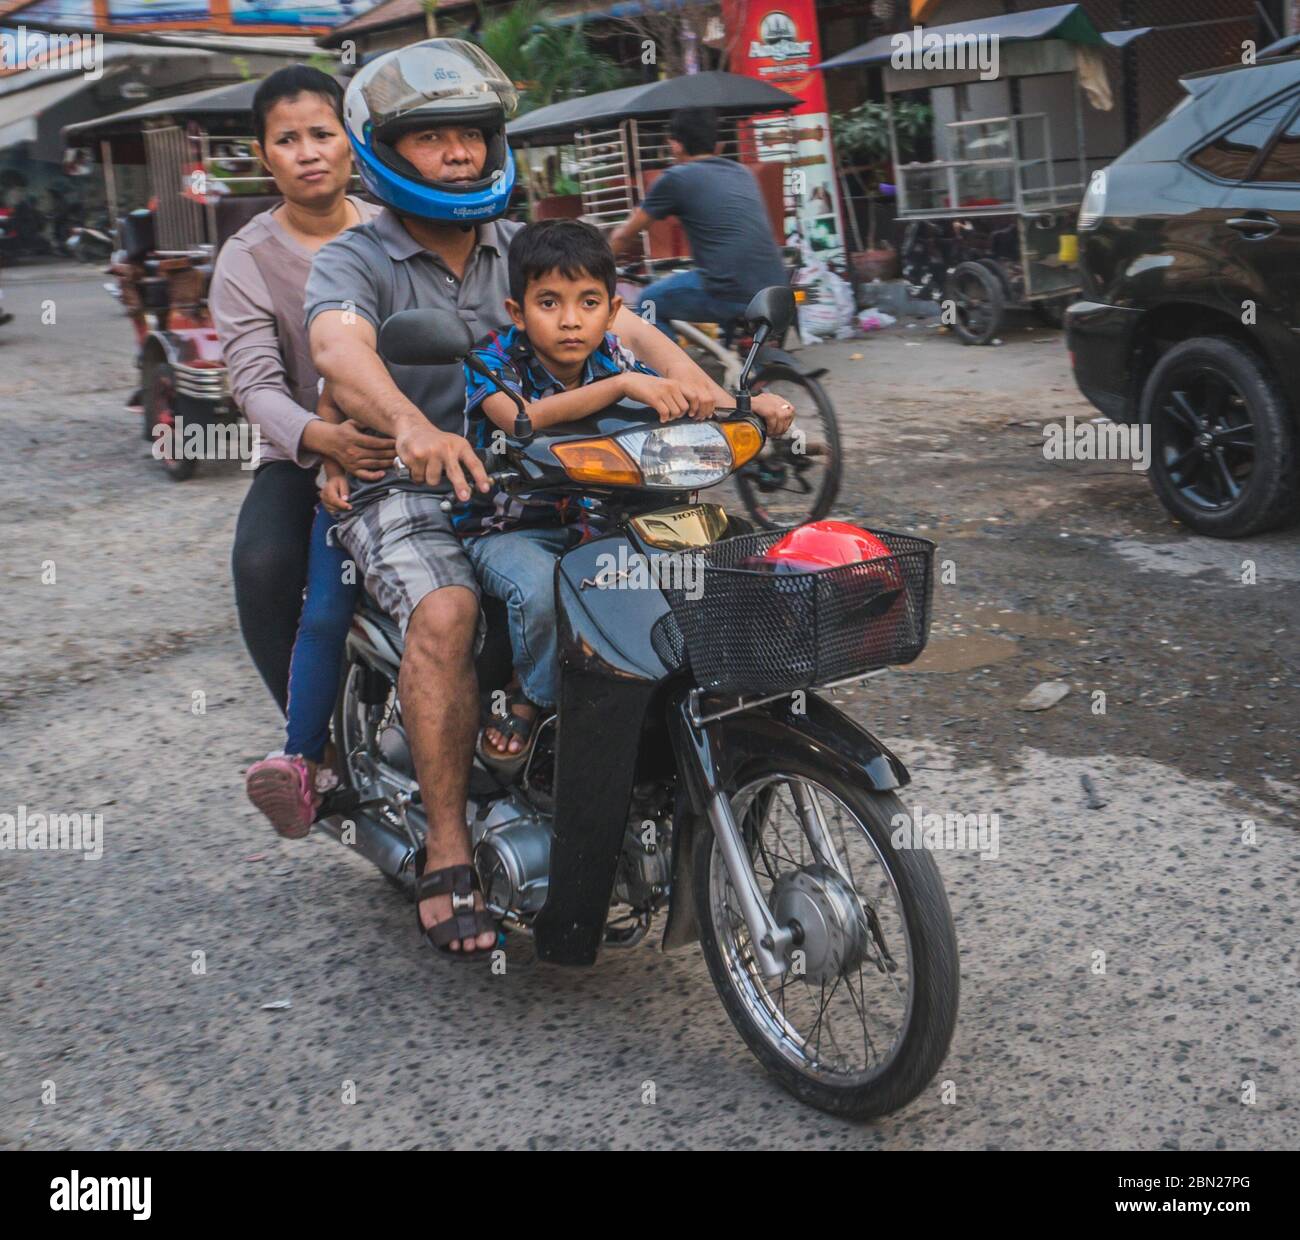 Family with children on a motorcycle, mother and her children. Transport in Asia. Phnom Penh, Cambodia - FEBRUARY 22, 2020 Stock Photo